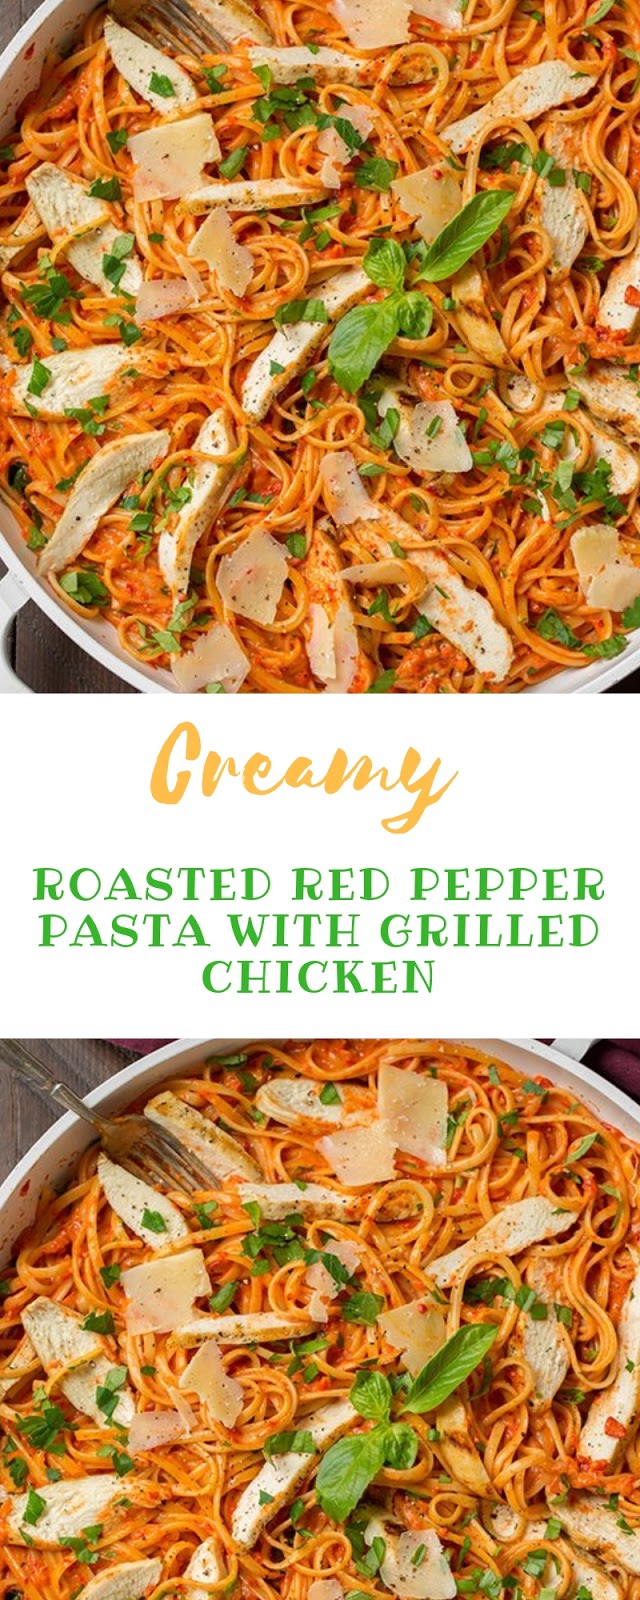 Creamy Roasted Red Pepper Pasta With Grilled Chicken | Delicious My Food